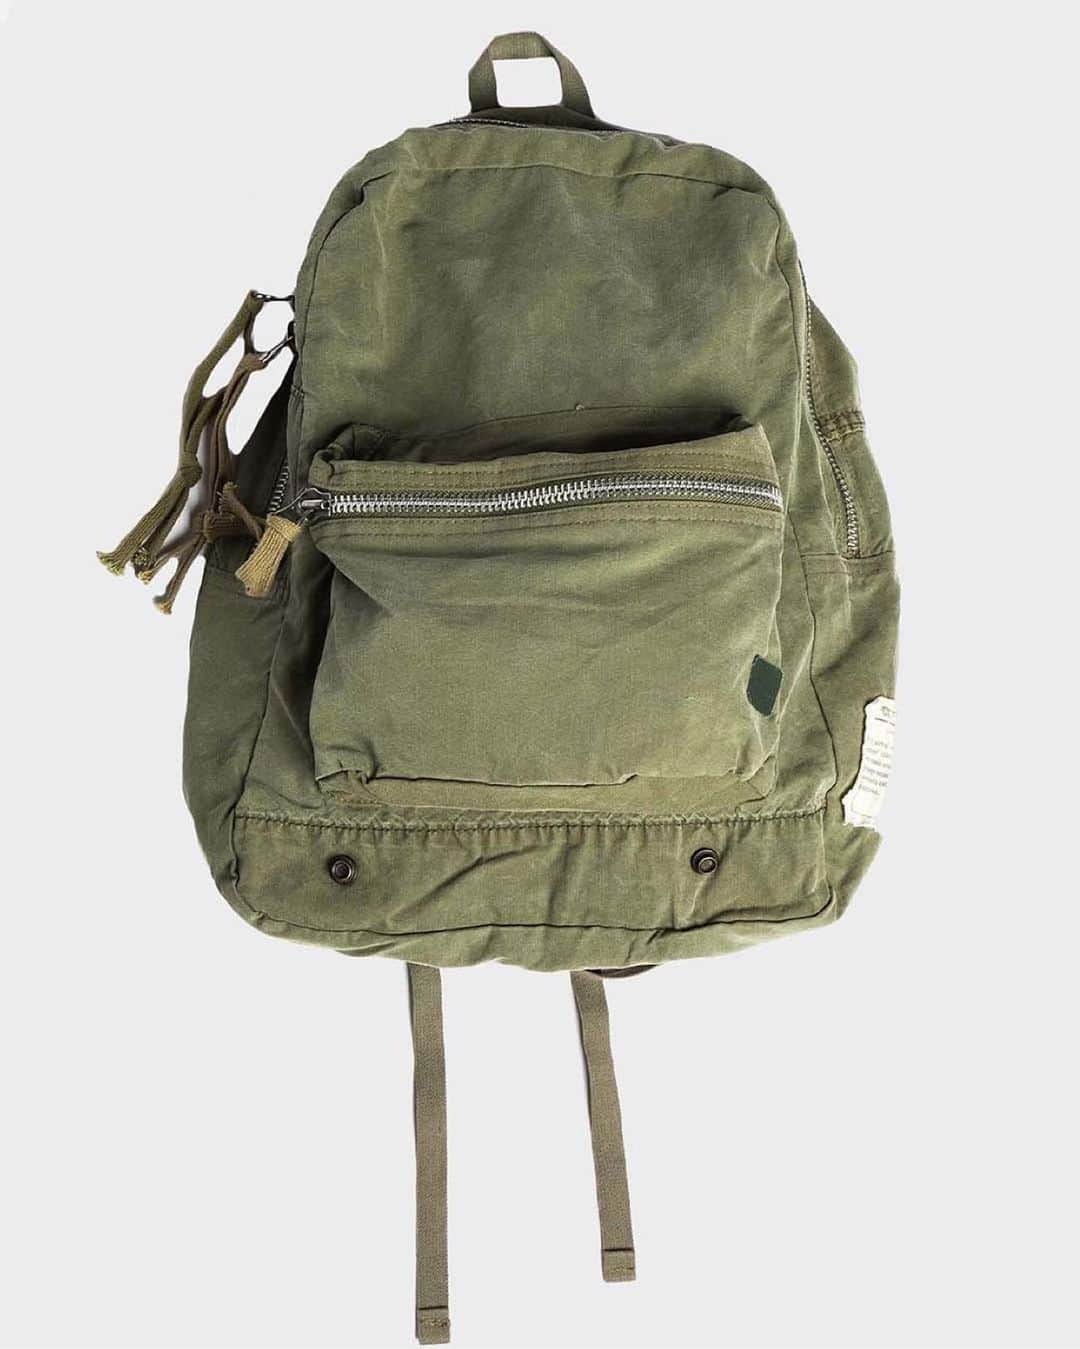 エリザベス・バークレーのインスタグラム：「Repost from @greglauren • THE GL SCRAPS BACKPACK   The GL SCRAPS backpack is made from the scraps of vintage U.S. Army tents right here in Los Angeles. In partnership with Communities In Schools of Los Angeles (CISLA), when you buy one GL SCRAPS Backpack, we give 5 backpacks to students who need it most in Los Angeles.  You may not think that a backpack is something that students need for virtual learning. However, what we learned from social workers at CISLA is that students now, more than ever, need a place to house all of their virtual learning supplies. Especially in homes where families have limited space. Help us, help students stay organized.  "We believe every child in America should have equal opportunity and access to a quality education. As children all over the country return to school this week, it is important to be conscious of the equity gap among rich and poor students, especially underserved Latino and Black students, those without full digital access, and supplies, English learners and those with disabilities, who will be left even farther behind." -CISLA  Communities In Schools of Los Angeles (CISLA) is dedicated to empowering students, who are most at-risk for dropping out, to stay in school and on a path to a brighter future.    In Los Angeles, working directly with 13 schools across the district, CISLA connects kids to caring adults and community resources designed to help them succeed. The schools we serve are part of the Los Angeles Unified School District (LAUSD) and are located in the historically impoverished neighborhoods of Boyle Heights, Pico-Union, South Central Los Angeles, Watts, and West Los Angeles.  In partnership with local organizations, CISLA ensures that students in their program - regardless of the challenges they may face - have what they need to graduate high school and attend college.  #allinforkids」